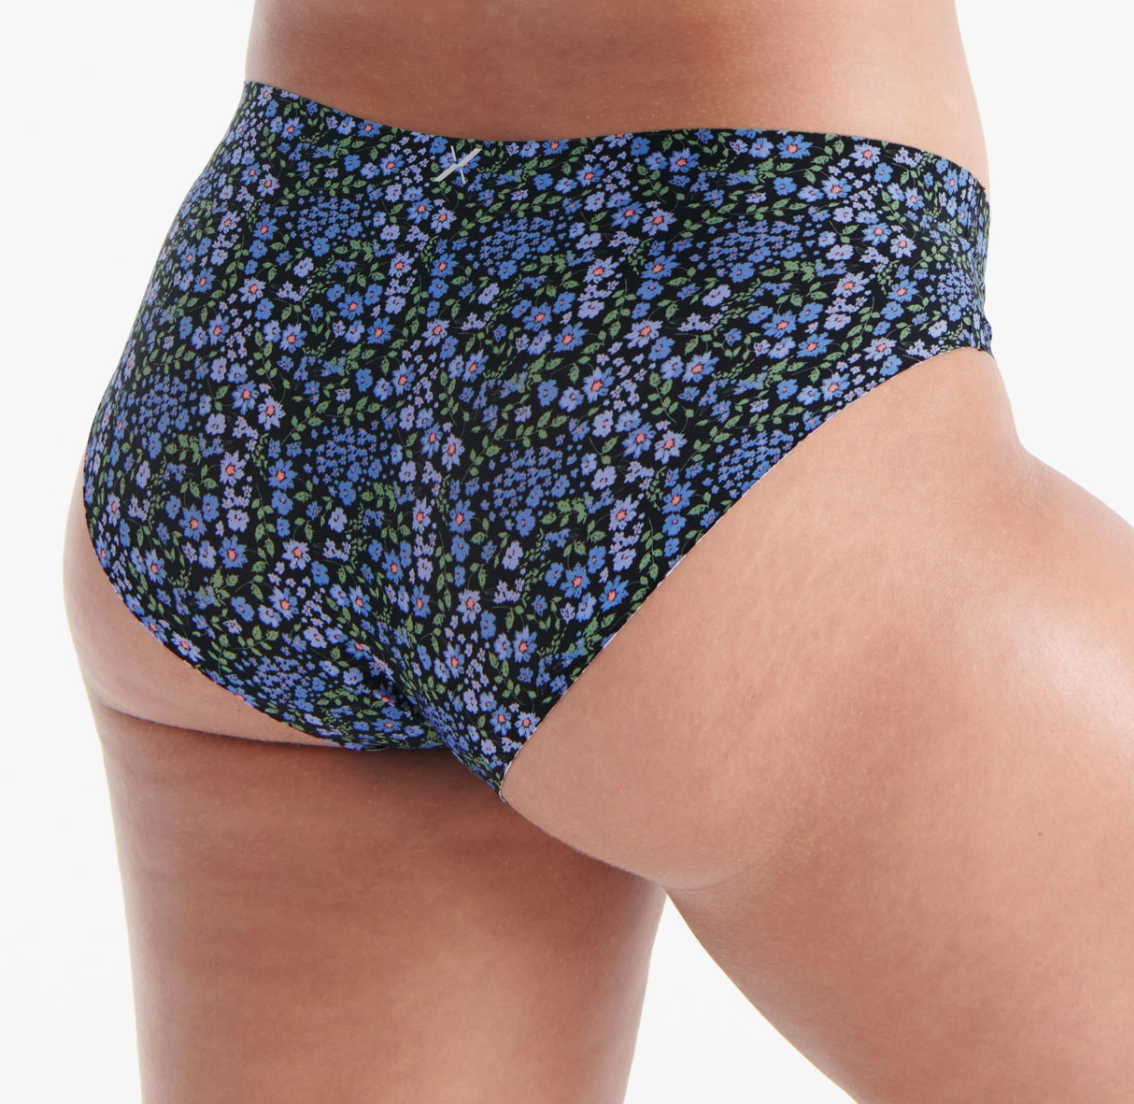 Review — Knix Period Underwear – Bright & Fresh Faces